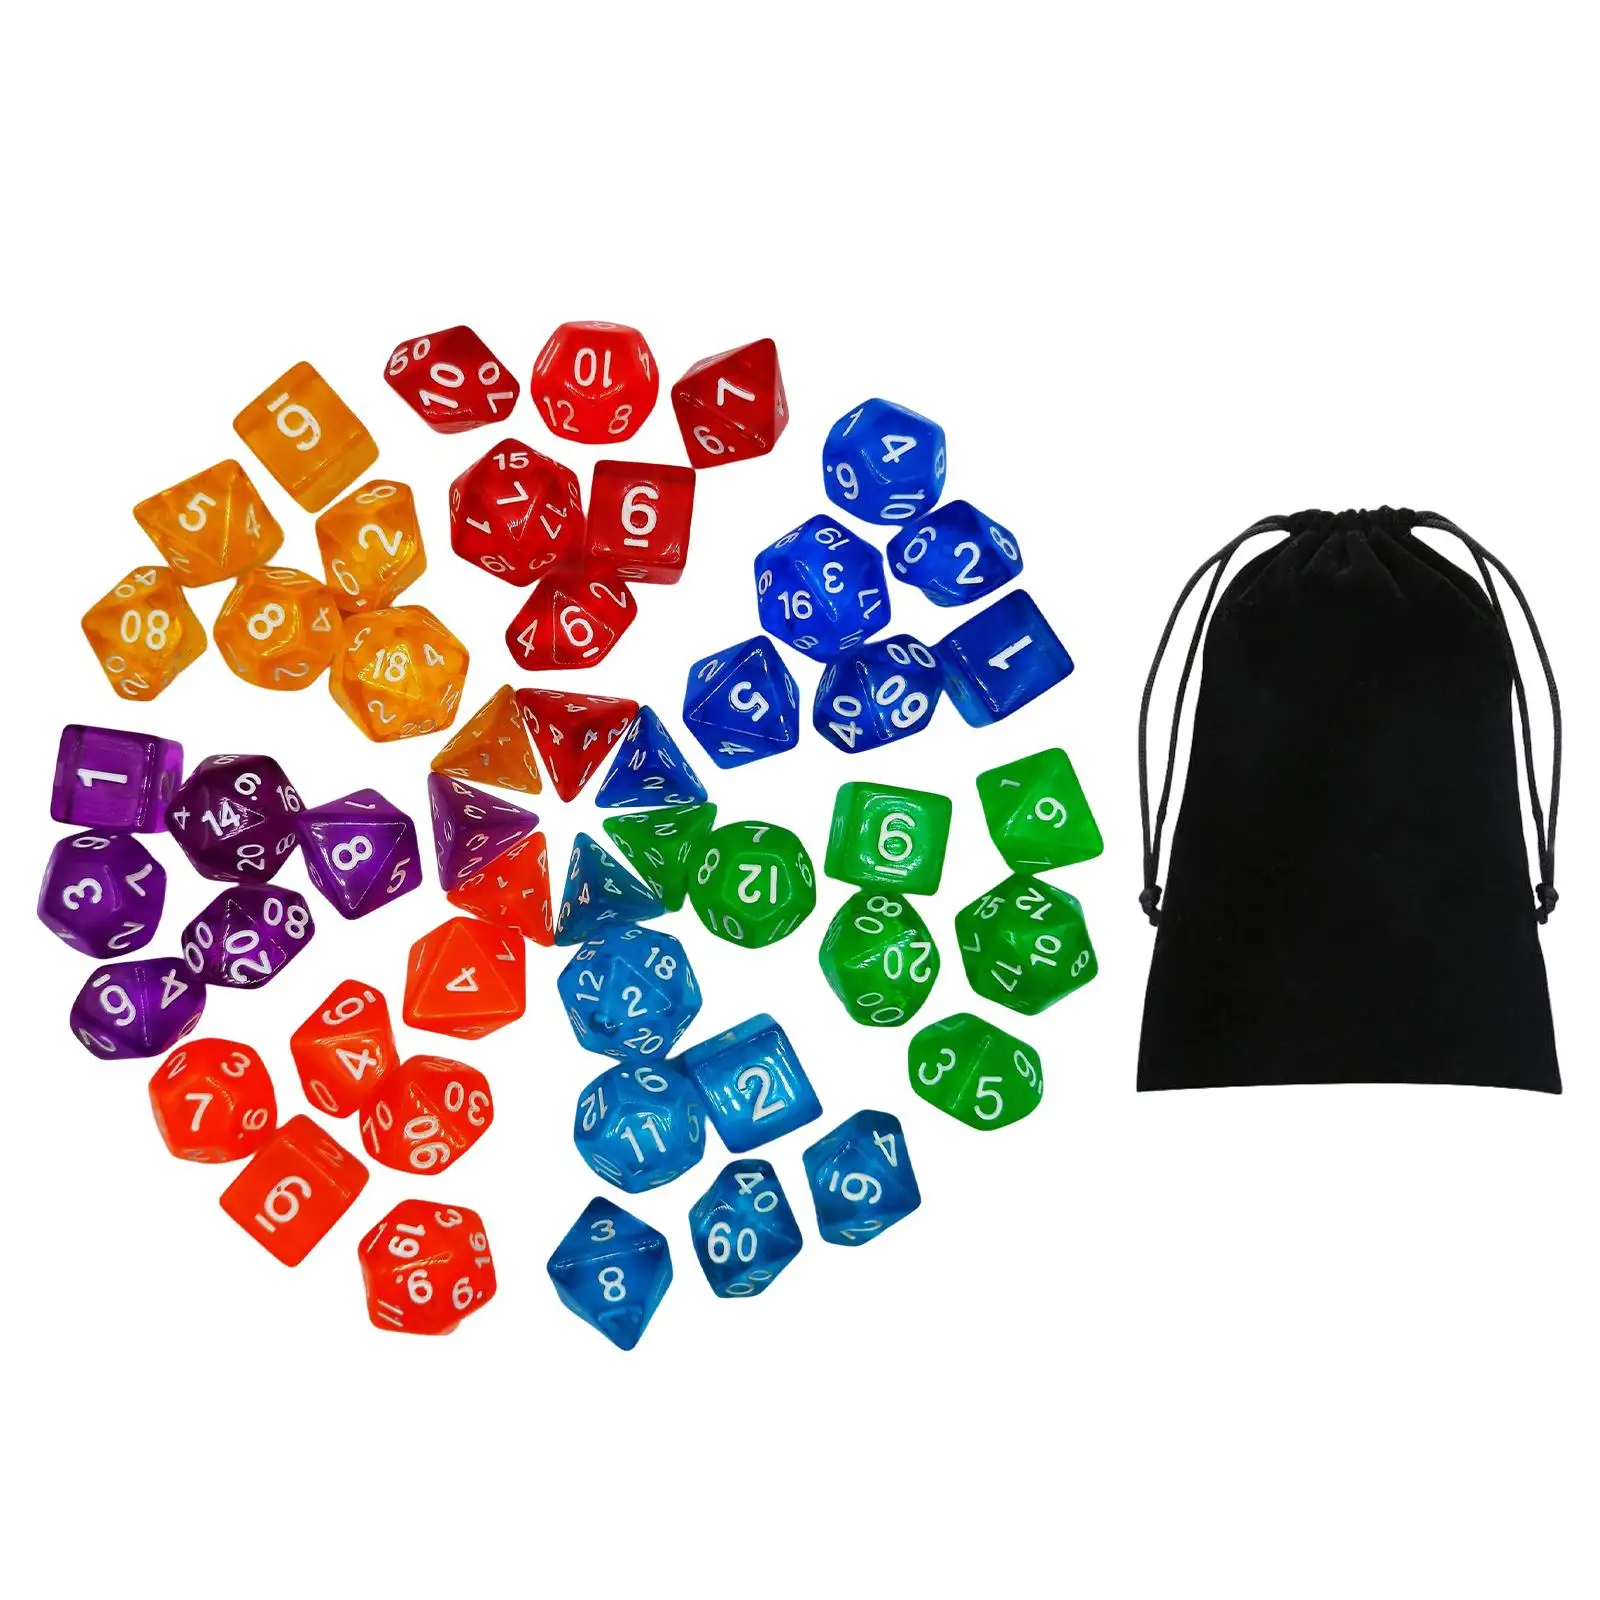 49x Polyhedral Dices Toys D8 D10 D12 D20 Math Teaching Colored Rolling Dices